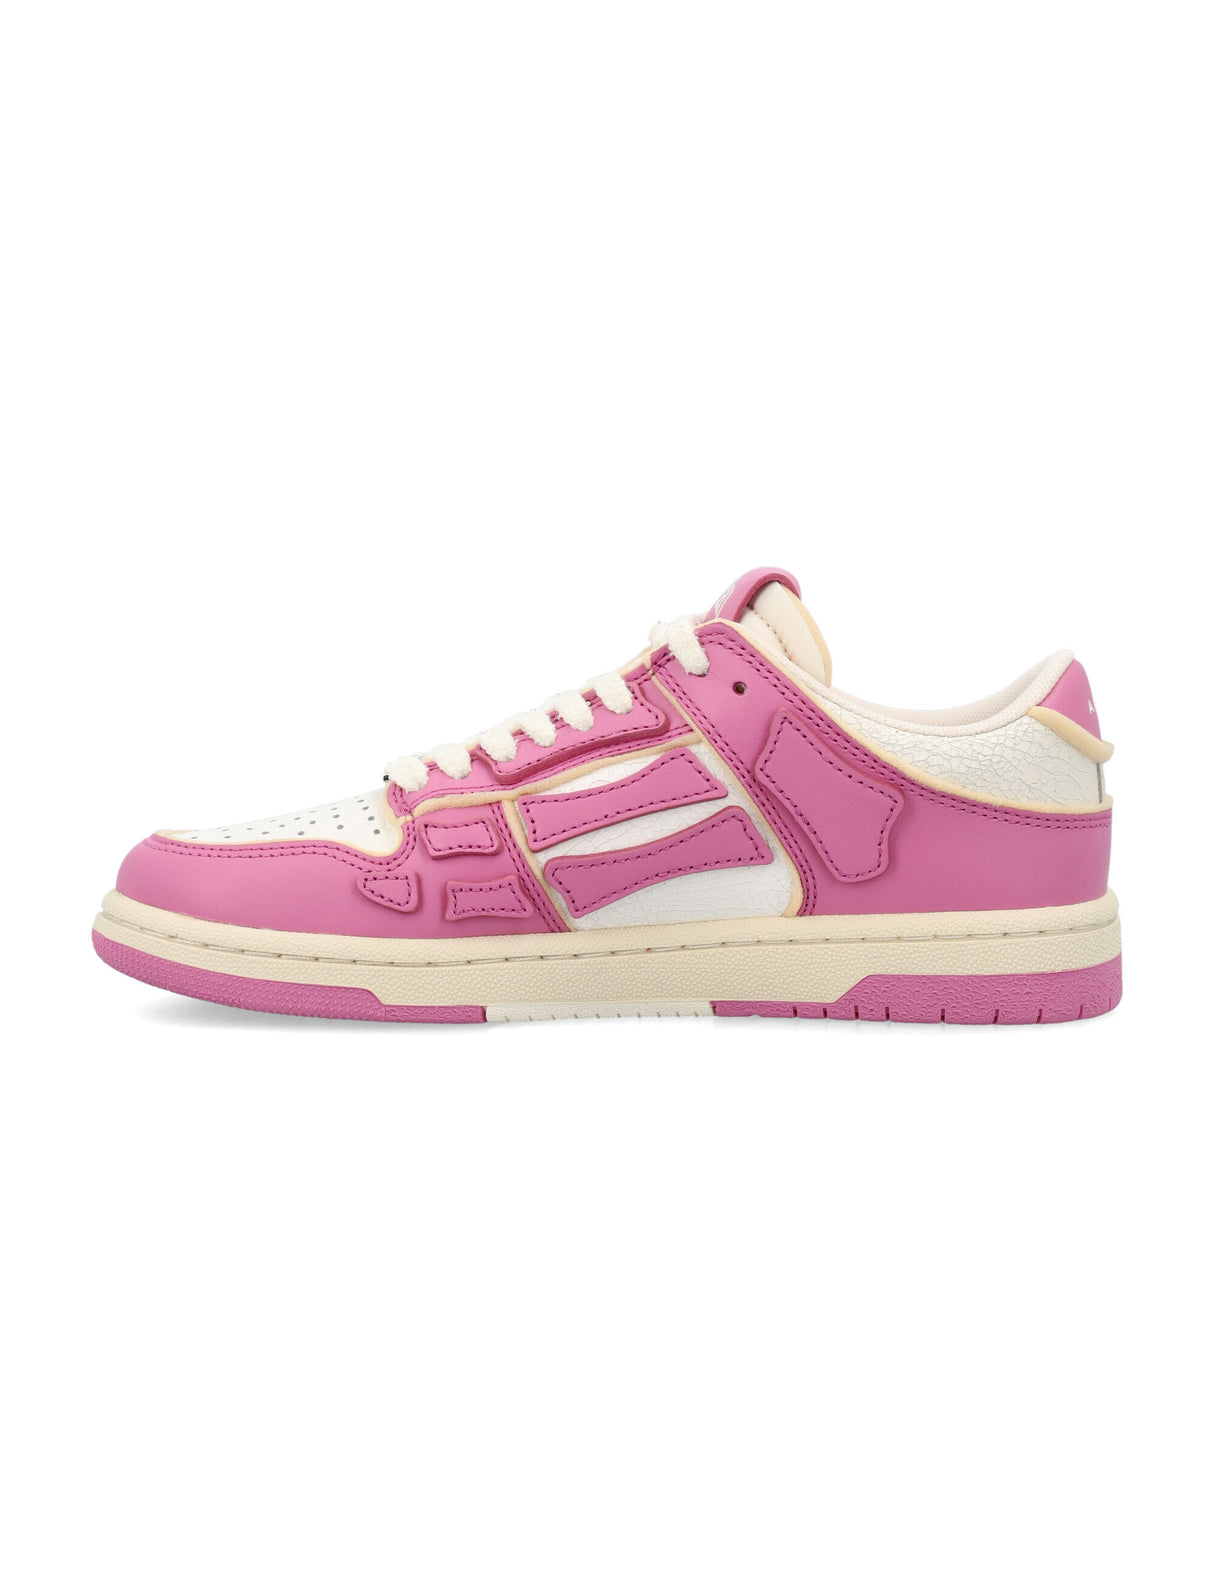 AMIRI Pink Low Top Cracked Leather Sneakers for Women - FW24